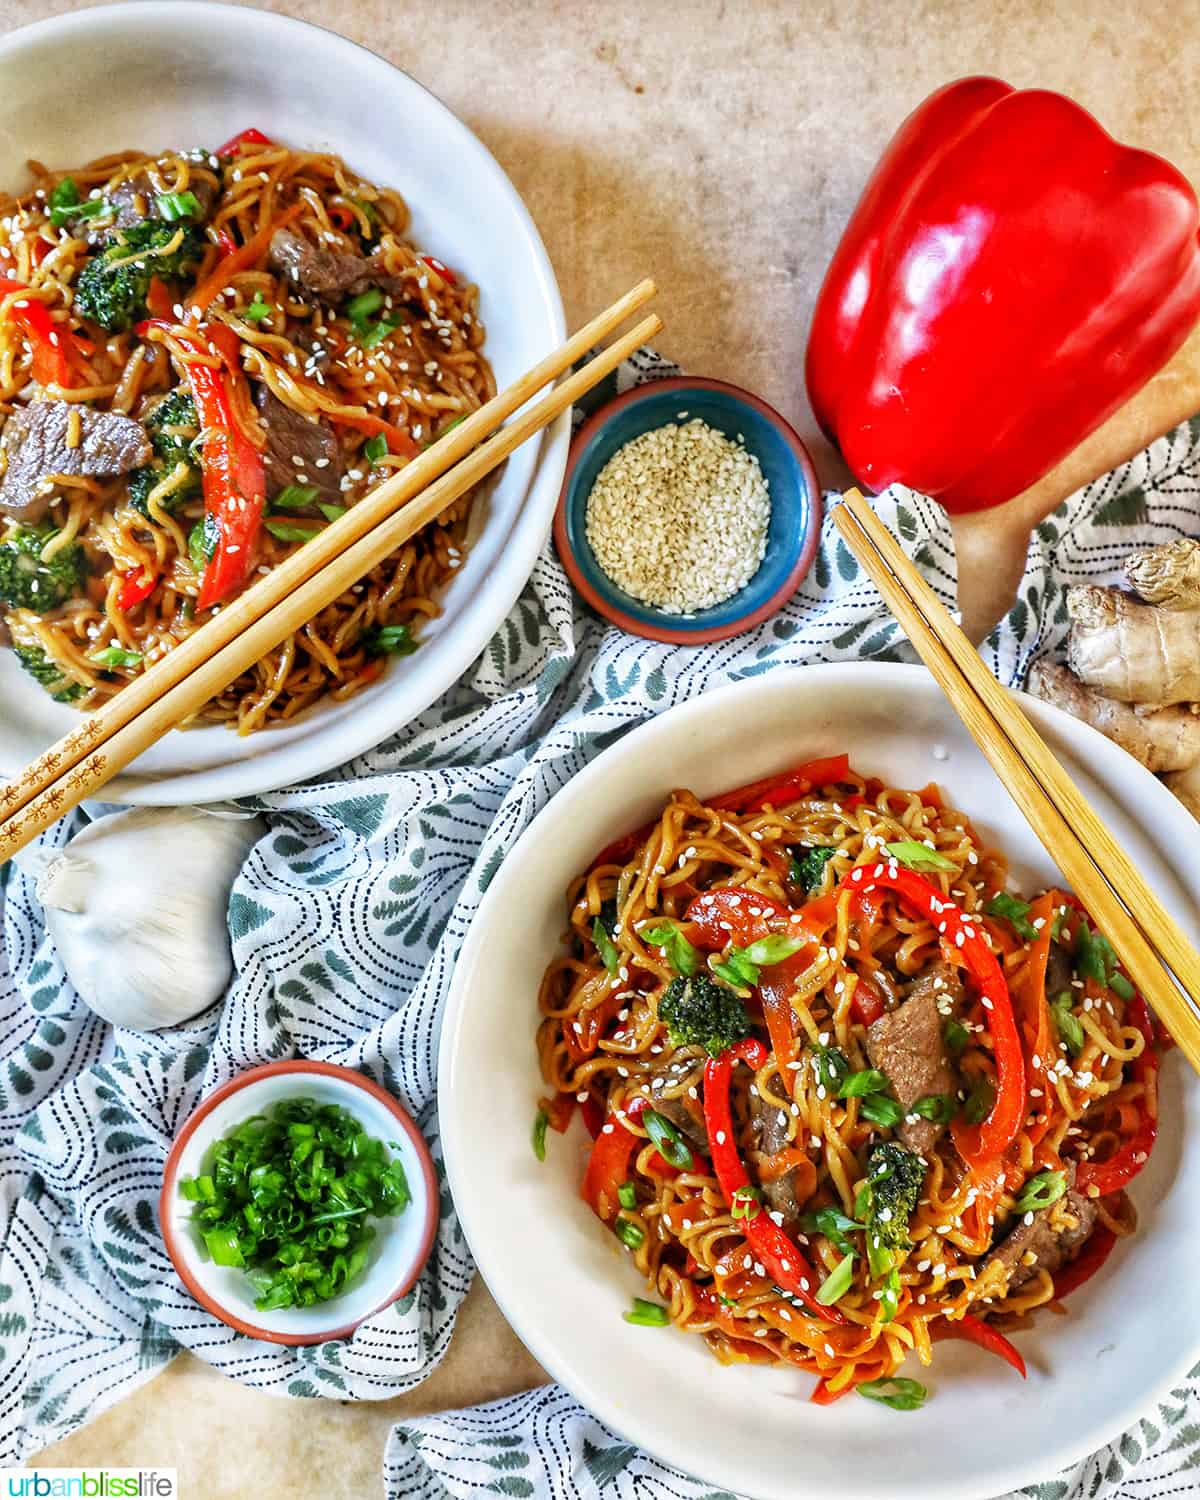 two bowls of sesame garlic noodles with chopsticks, bowls of scallions and sesame seeds, a red bell pepper, all on a green and white napkin and yellow table.